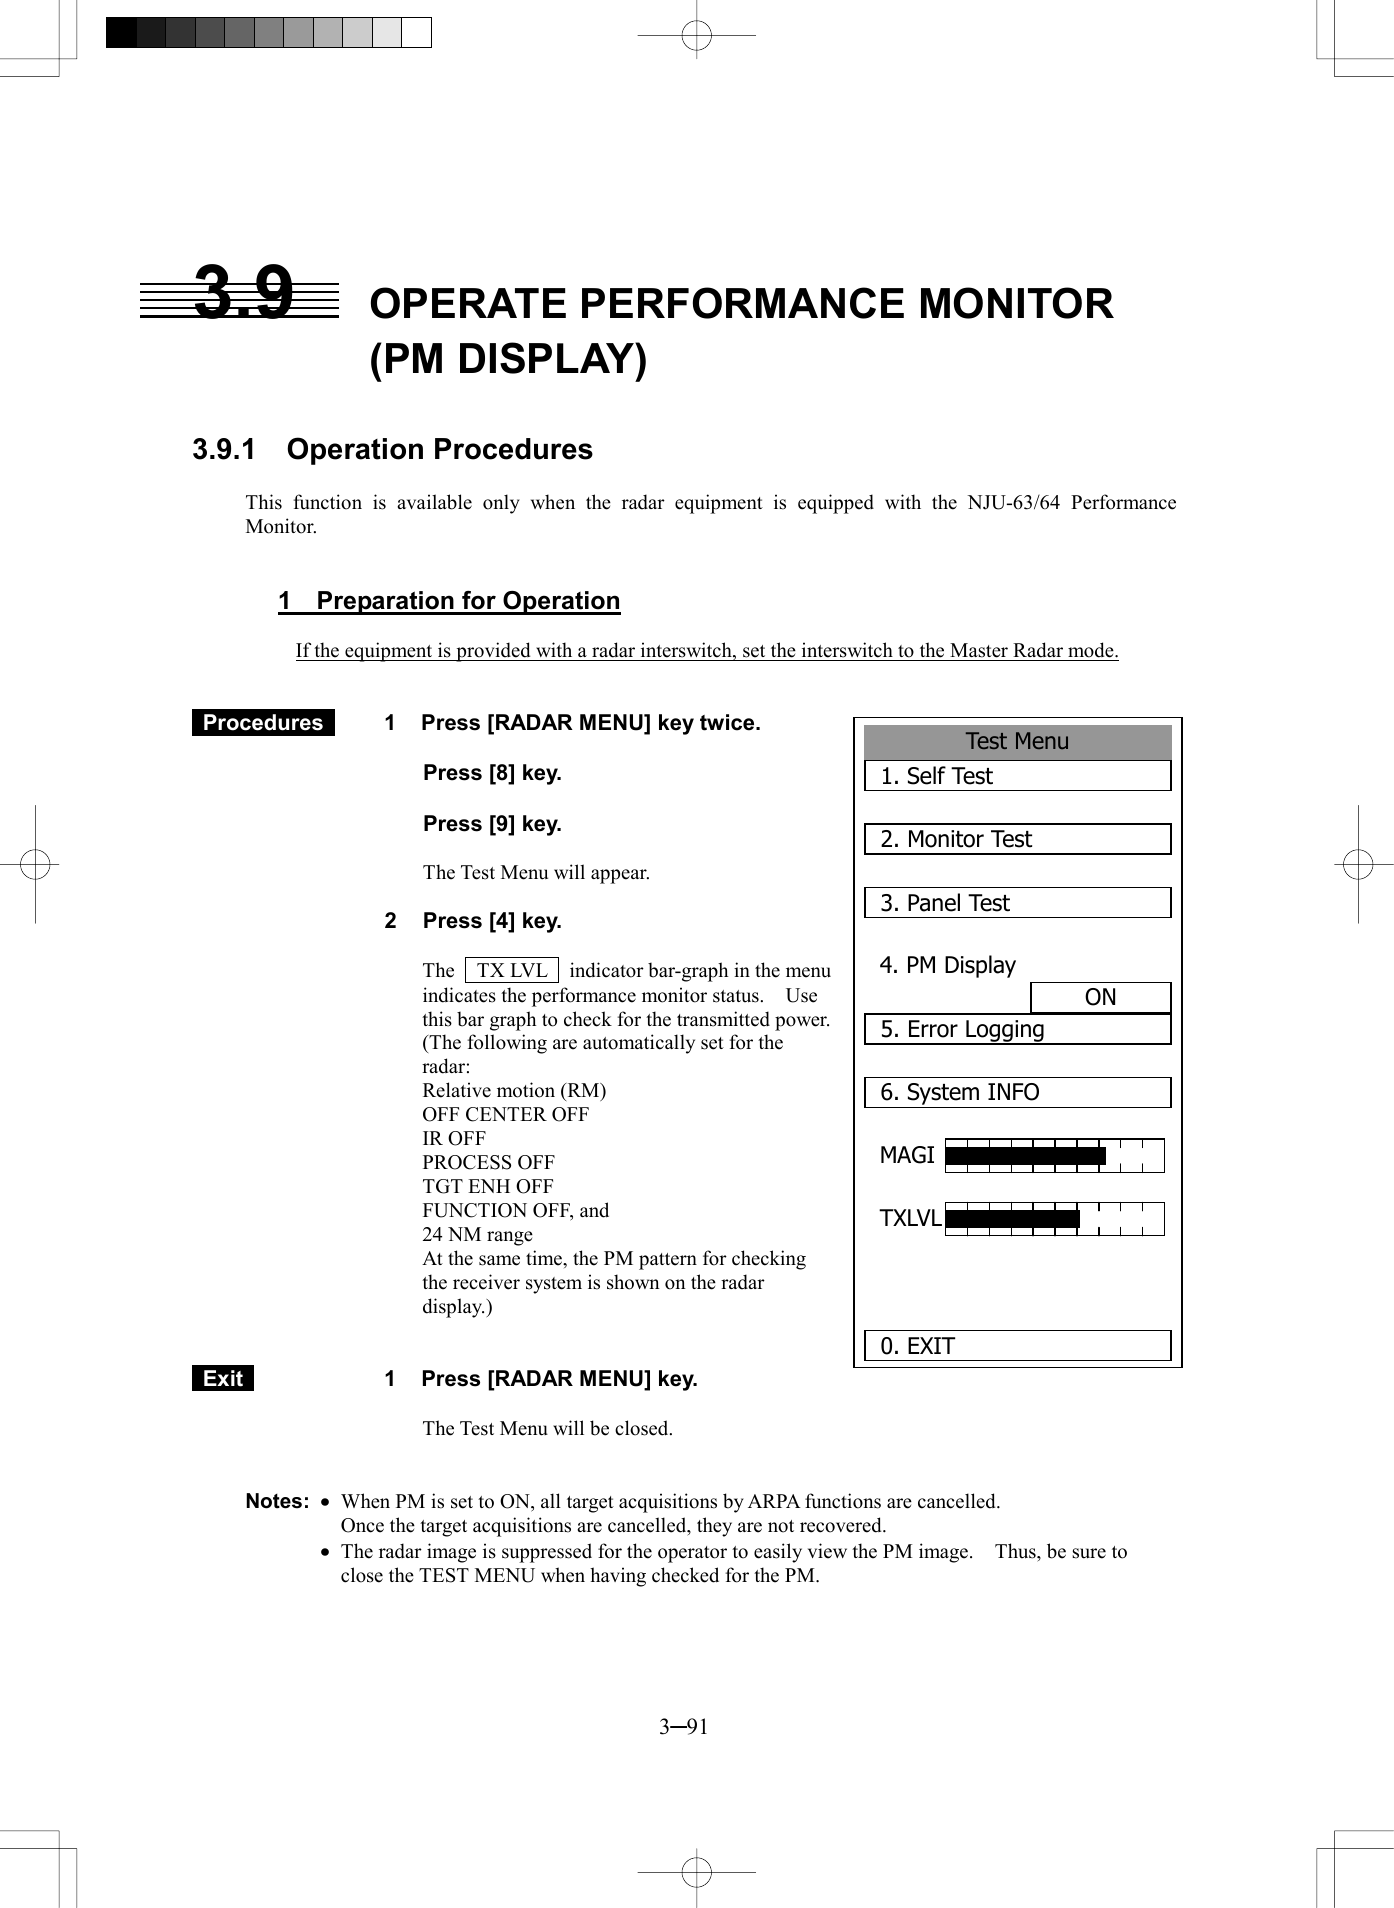  3─91  3.9  OPERATE PERFORMANCE MONITOR (PM DISPLAY)   3.9.1  Operation Procedures  This function is available only when the radar equipment is equipped with the NJU-63/64 Performance Monitor.   1  Preparation for Operation  If the equipment is provided with a radar interswitch, set the interswitch to the Master Radar mode.    Procedures   1  Press [RADAR MENU] key twice.    Press [8] key.    Press [9] key.  The Test Menu will appear.  2  Press [4] key.  The    TX LVL    indicator bar-graph in the menu indicates the performance monitor status.    Use this bar graph to check for the transmitted power. (The following are automatically set for the radar: Relative motion (RM) OFF CENTER OFF IR OFF PROCESS OFF TGT ENH OFF FUNCTION OFF, and 24 NM range At the same time, the PM pattern for checking the receiver system is shown on the radar display.)    Exit   1  Press [RADAR MENU] key.  The Test Menu will be closed.   Notes: ·  When PM is set to ON, all target acquisitions by ARPA functions are cancelled.     Once the target acquisitions are cancelled, they are not recovered.  ·  The radar image is suppressed for the operator to easily view the PM image.    Thus, be sure to close the TEST MENU when having checked for the PM.  Test Menu1. Self Test2. Monitor Test3. Panel Test4. PM DisplayON5. Error Logging6. System INFOMAGI TXLVL  0. EXIT 